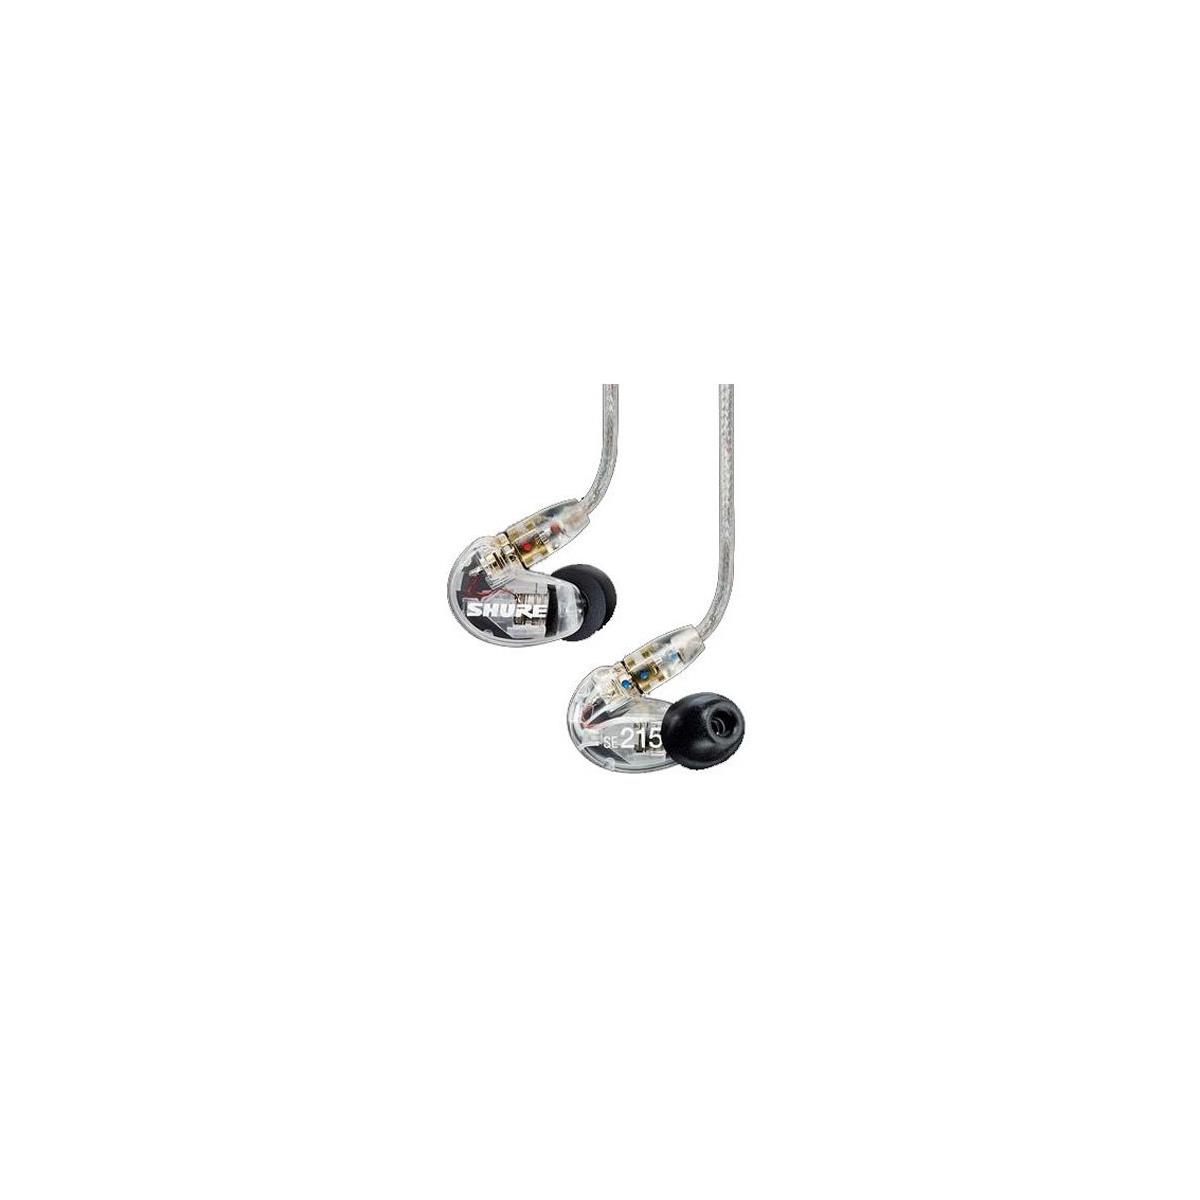 Image of Shure SE215 Sound-Isolating In-Ear Stereo Earphones